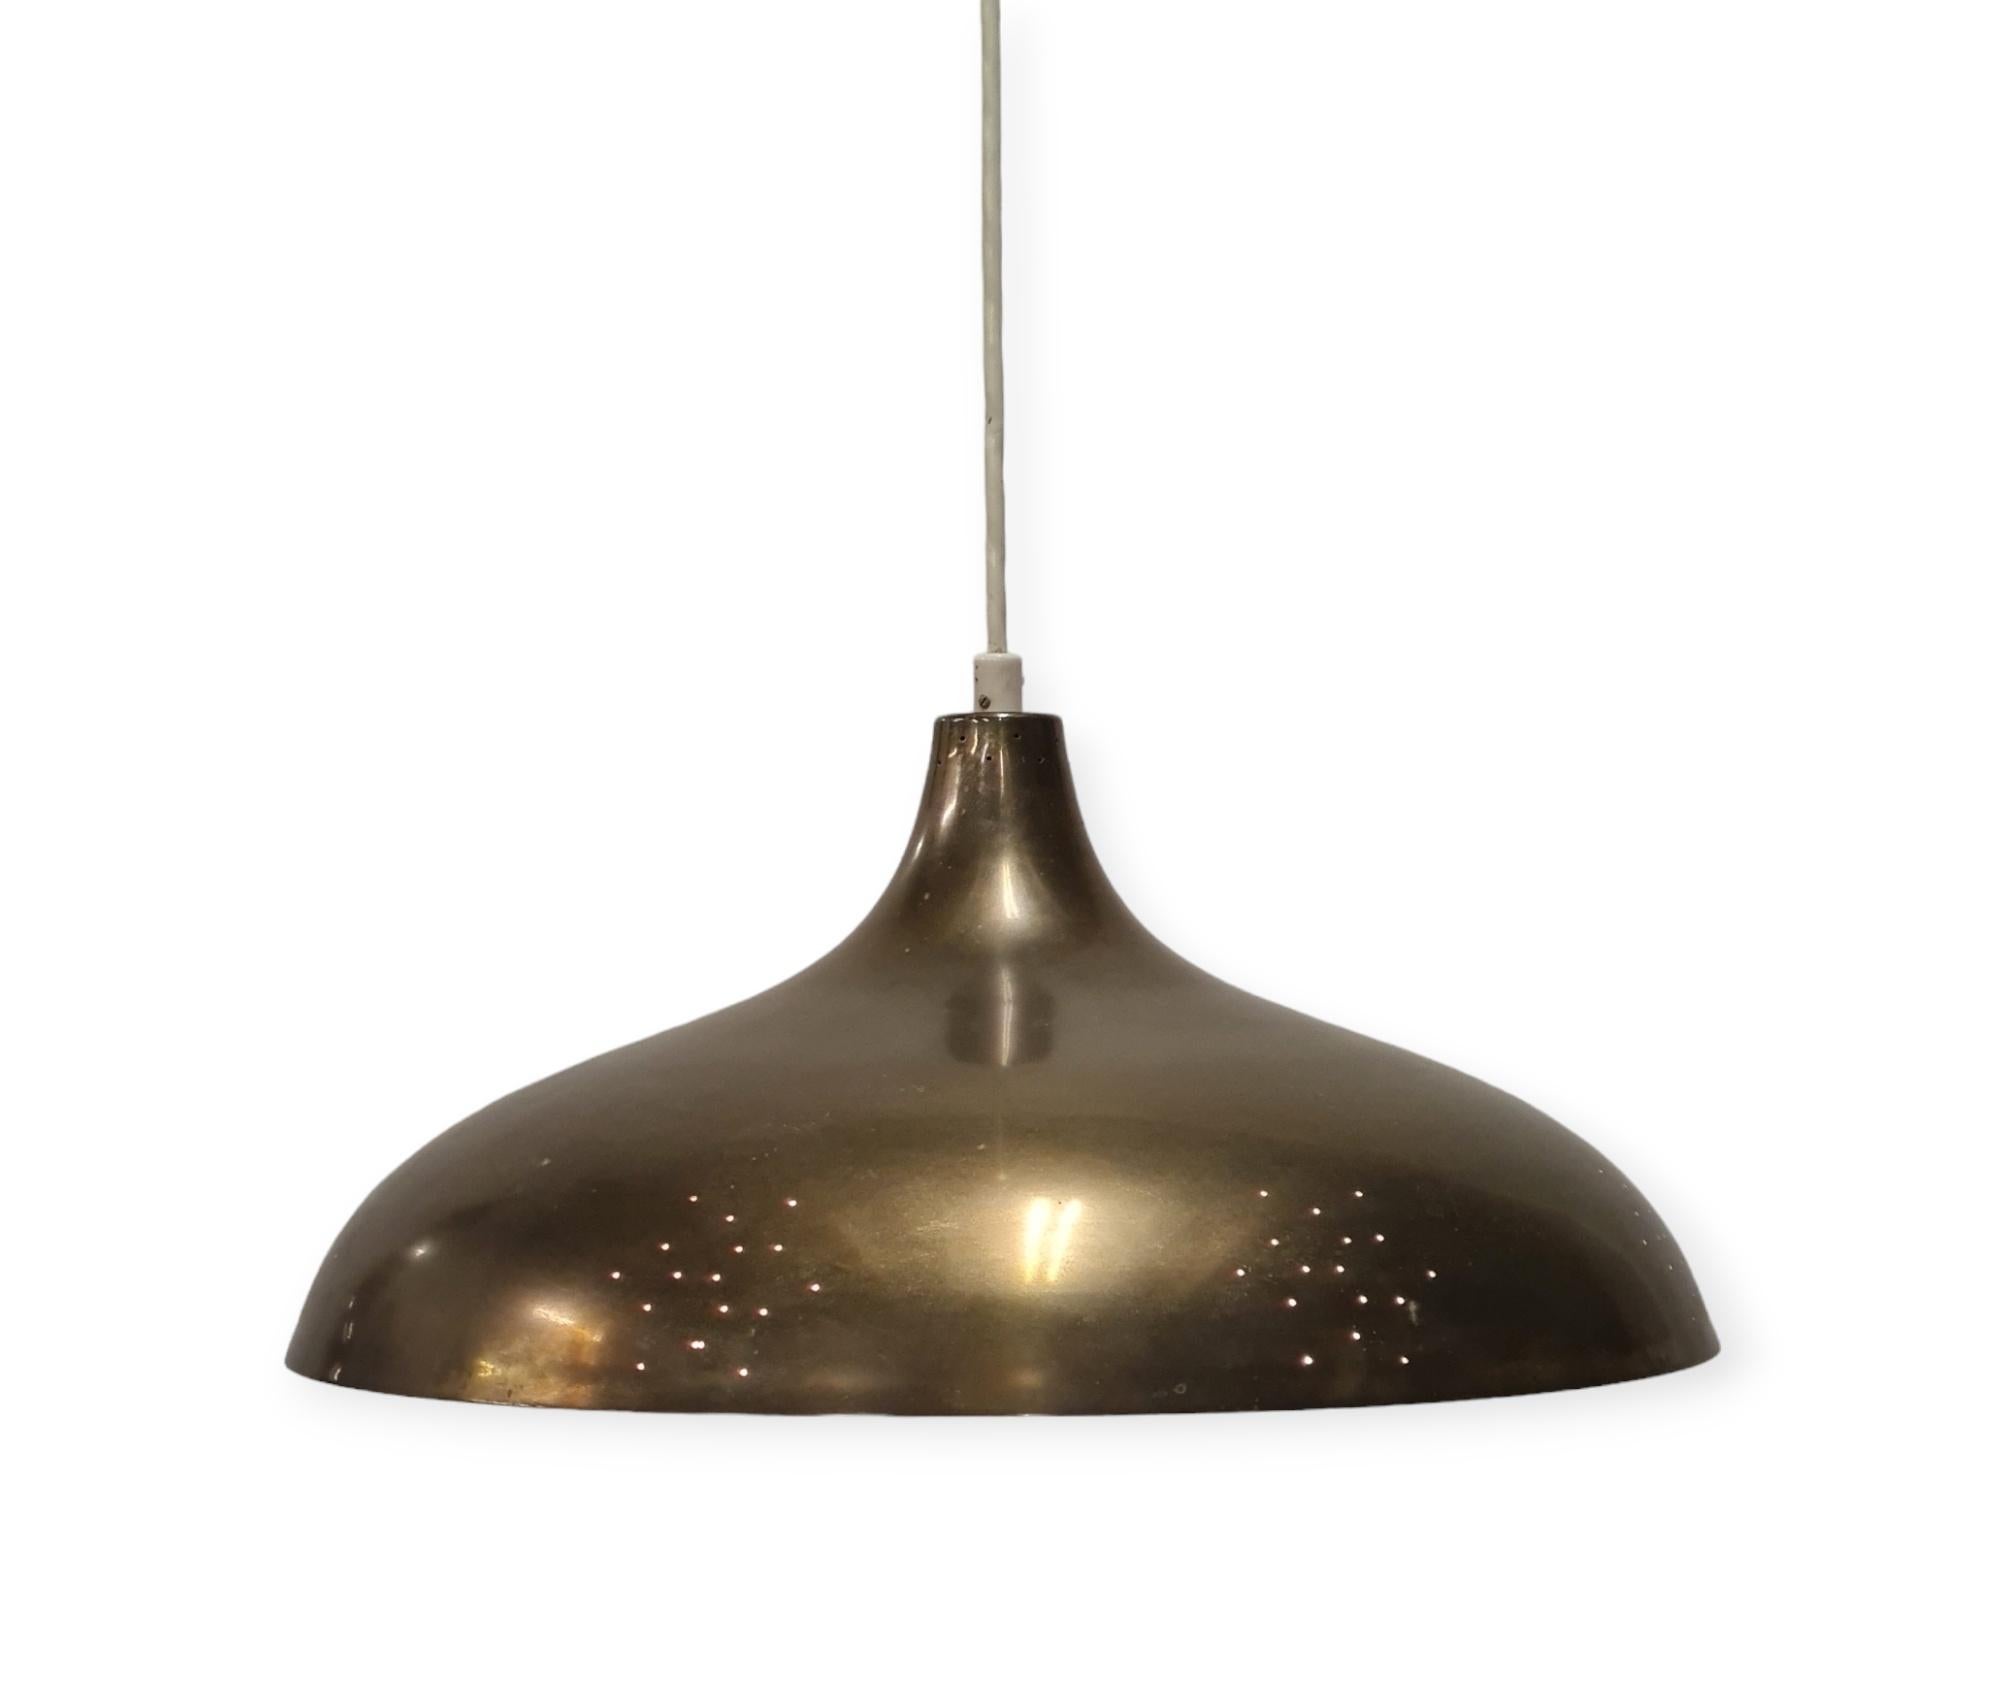 Finnish Gorgeous PSO ceiling lamp model 468010 in perforated brass, 1950s For Sale